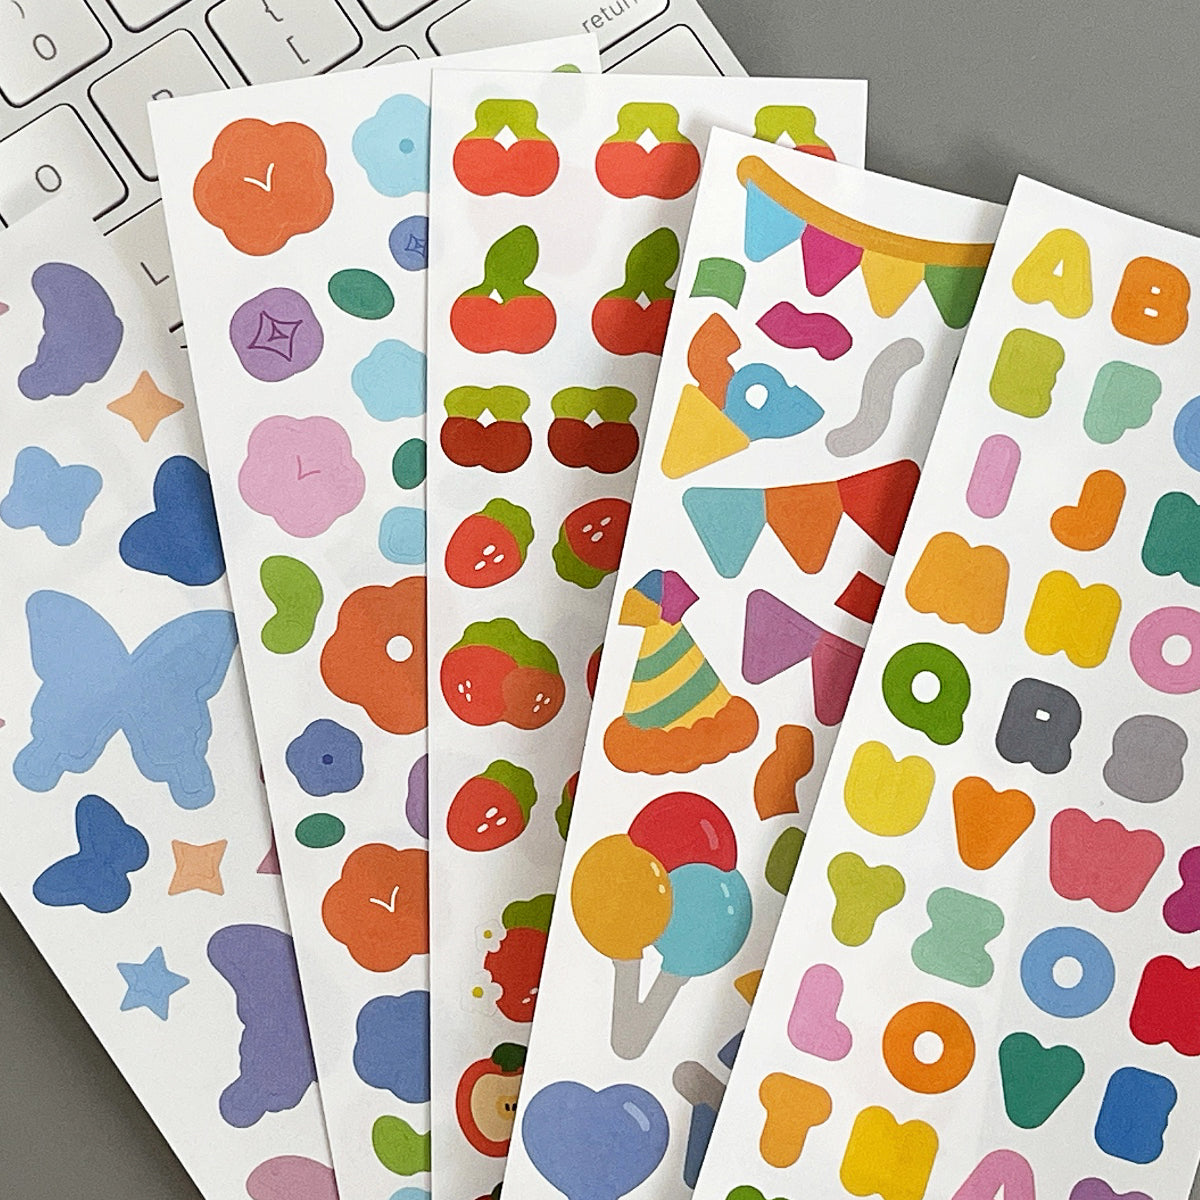 Wrapables Colorful Decorative Stickers for Scrapbooking, DIY Crafts, Stationery, Diary, Card Making